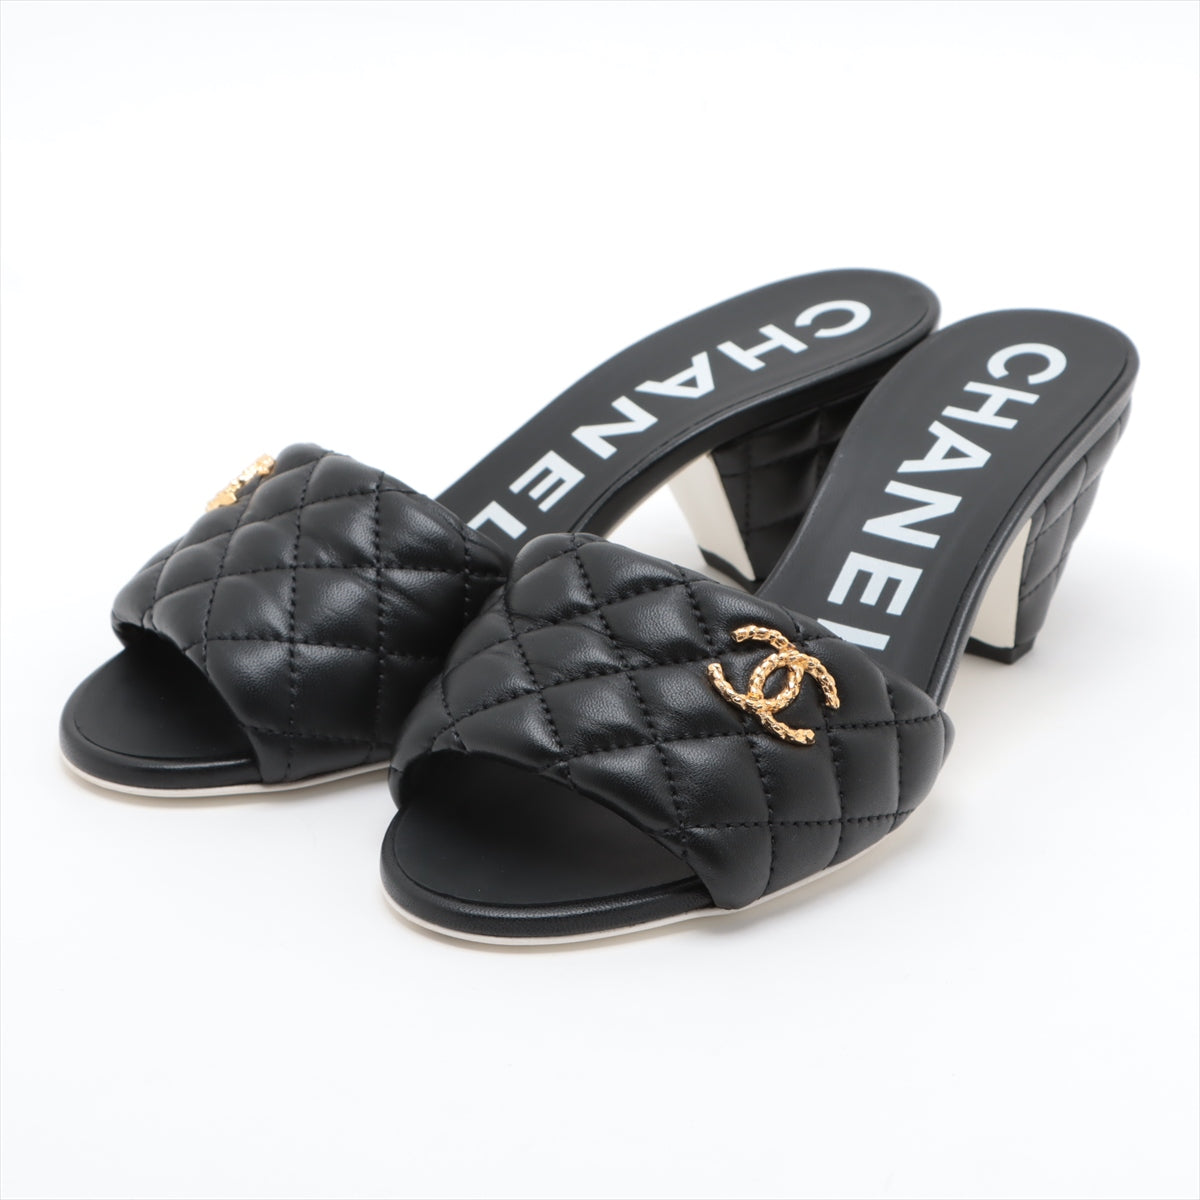 Chanel Coco Mark Matelasse Leather Sandals 36C Ladies' Black G38820 There is a bag